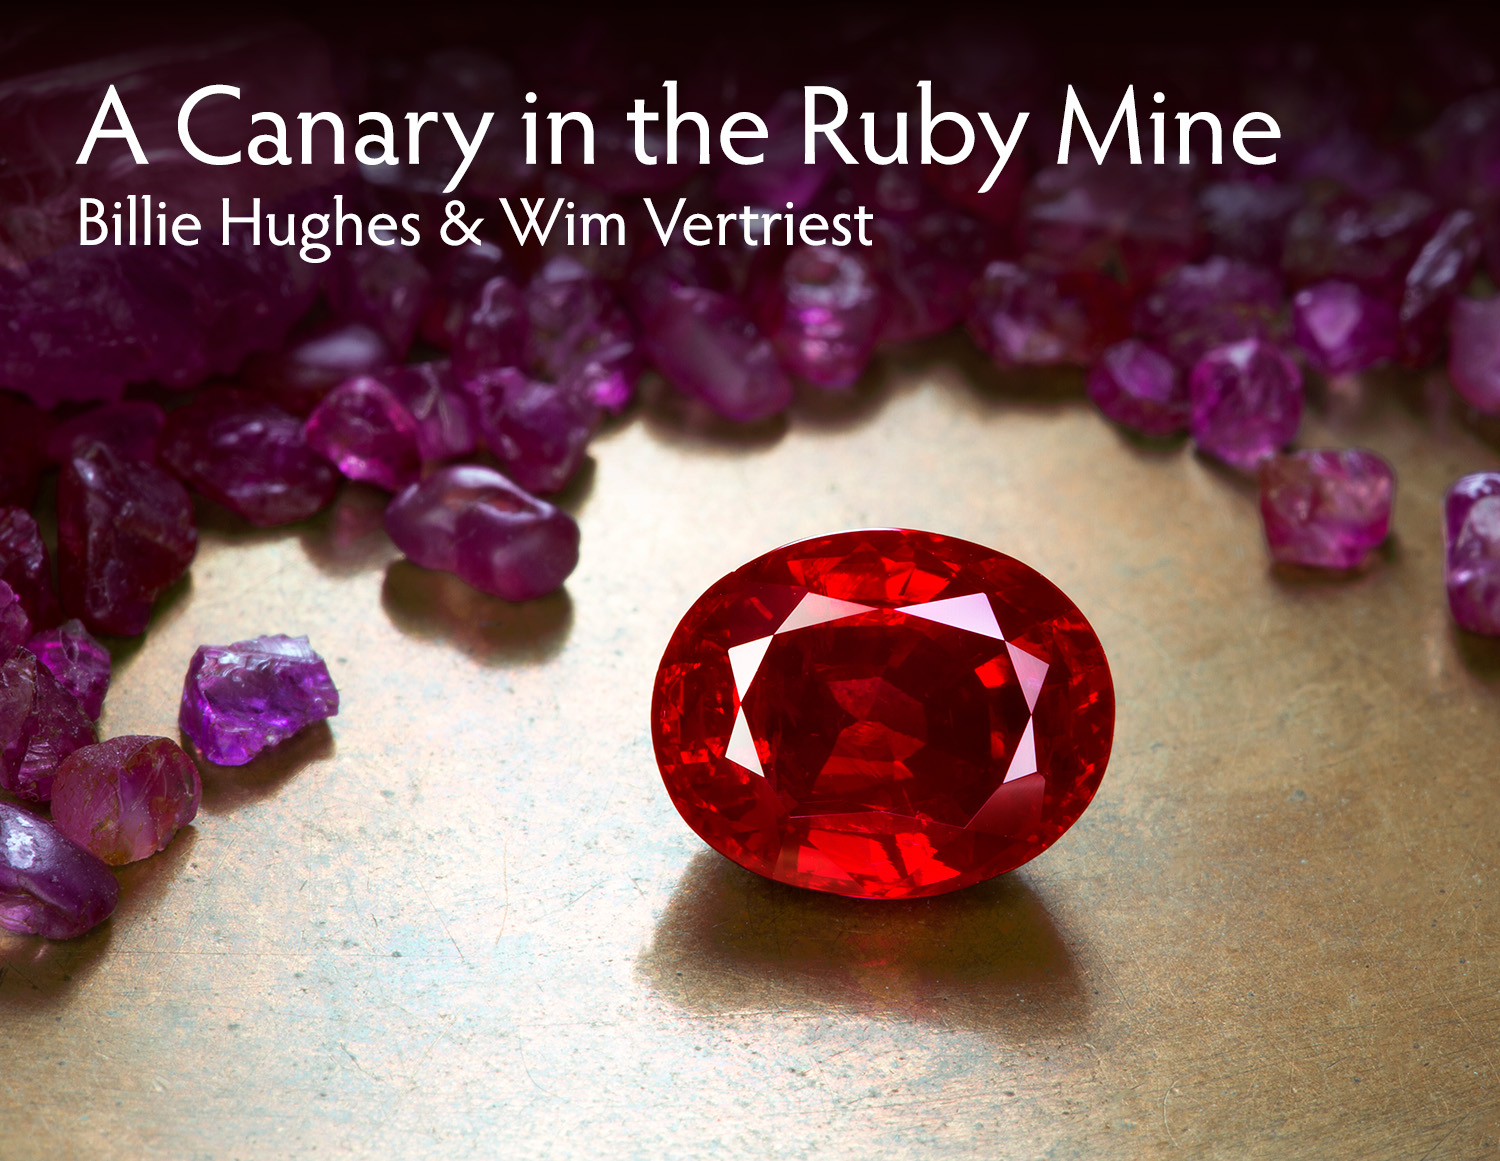 A Canary in the Ruby Mine